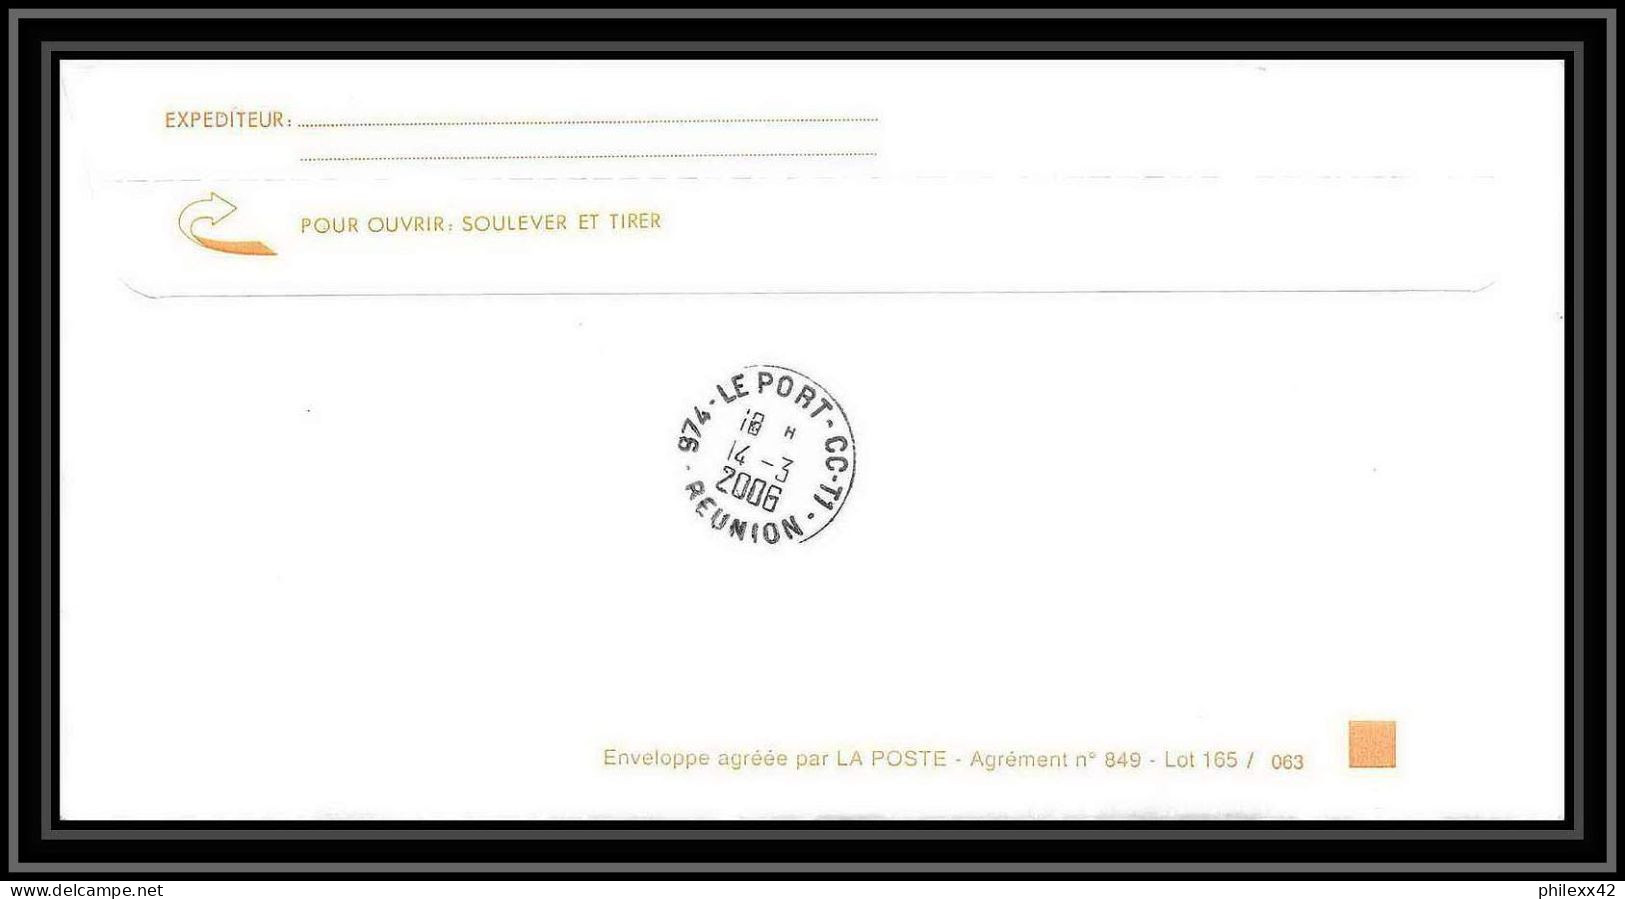 2565 ANTARCTIC SYDNEY AUSTRALIA -Lettre Cover Dufresne 2 Signé Signed 3/3/2006 N°430 Paquebot  - Antarctic Expeditions